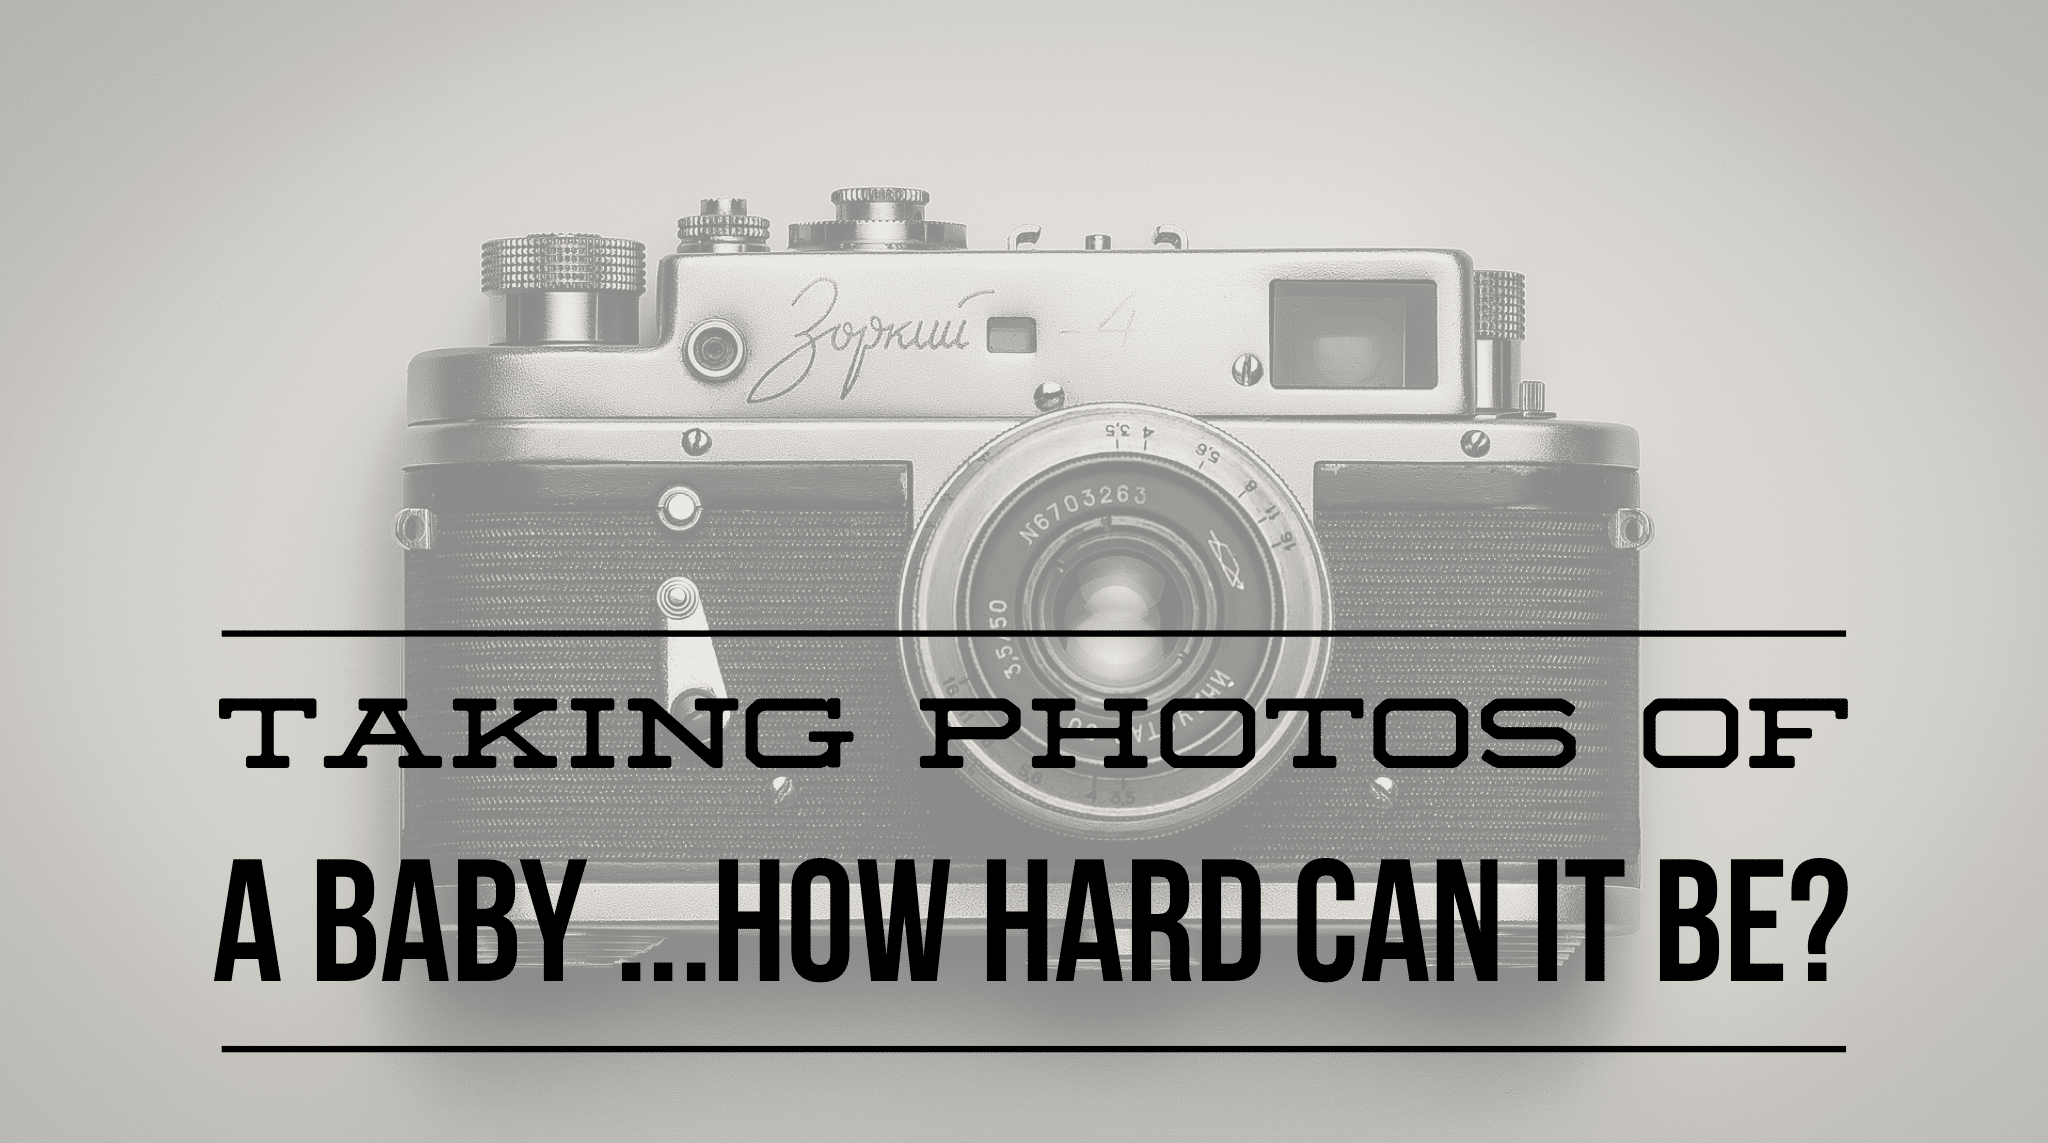 Taking photos of a baby…how hard can it be?